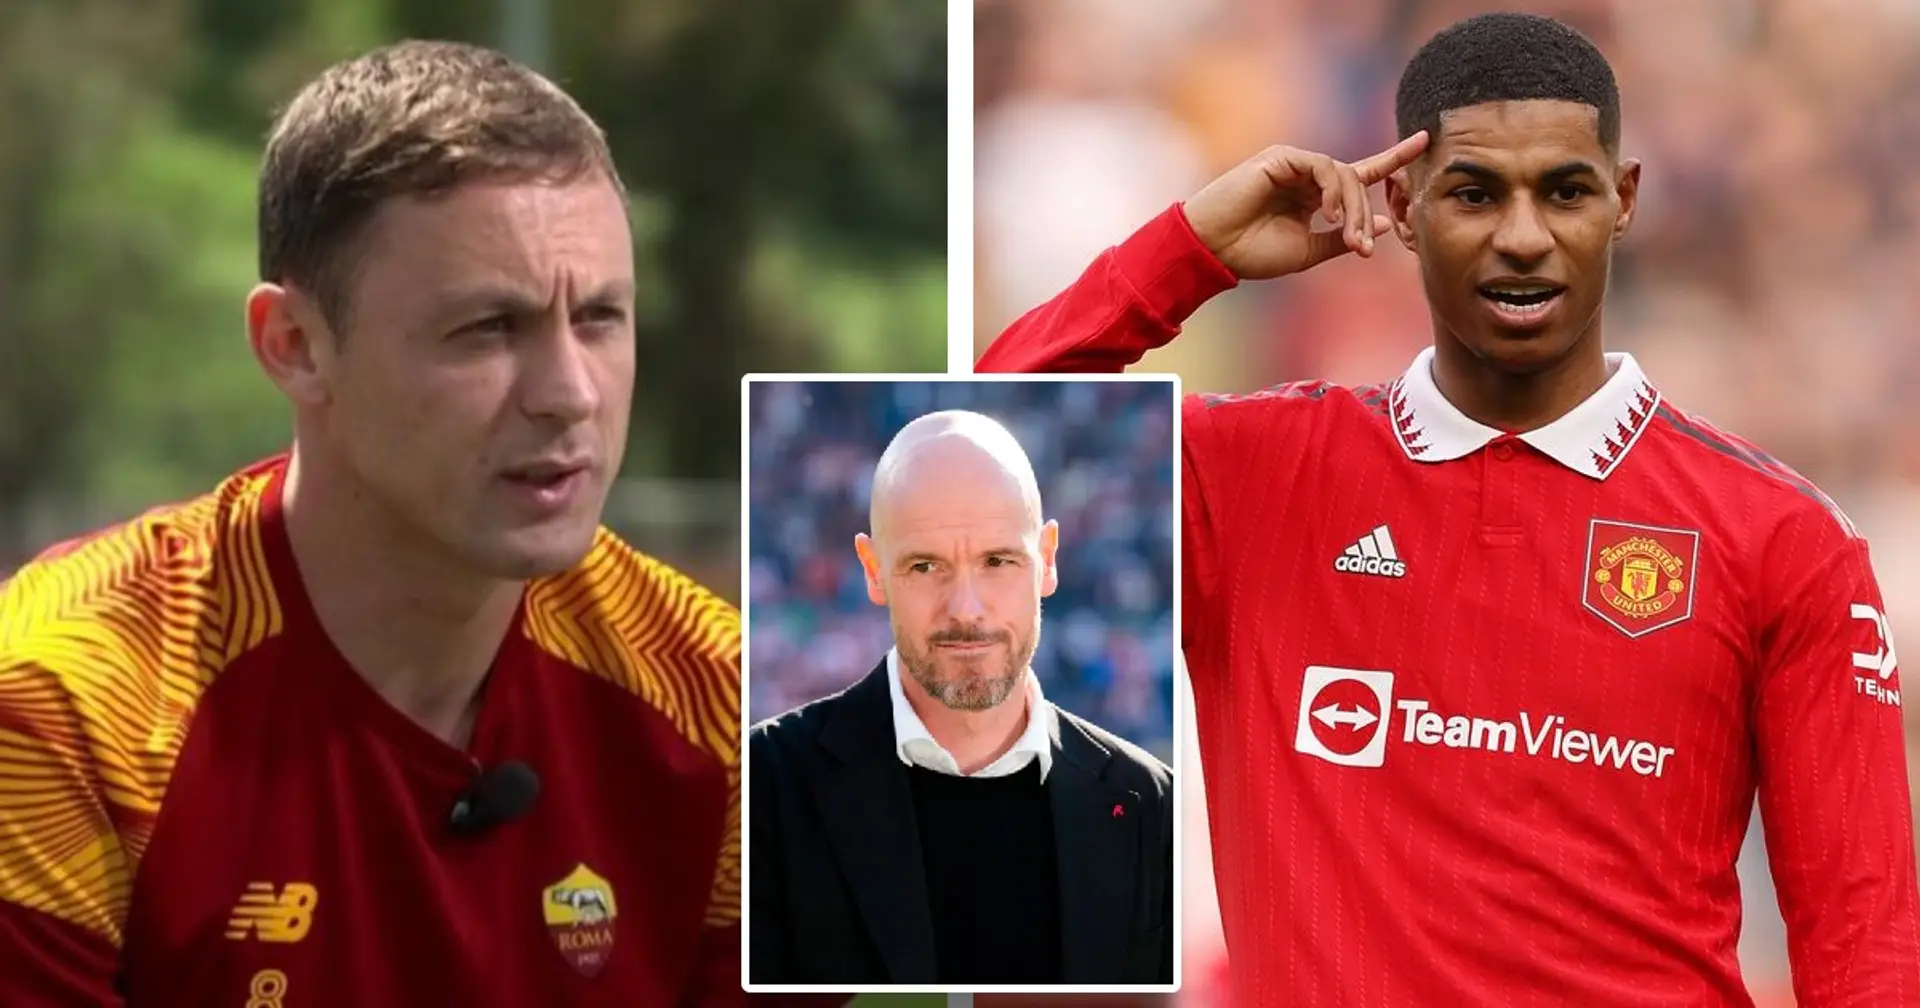 'I like the way he wants to play': Matic on Ten Hag, Man United's title ambitions next season and Rashford's form